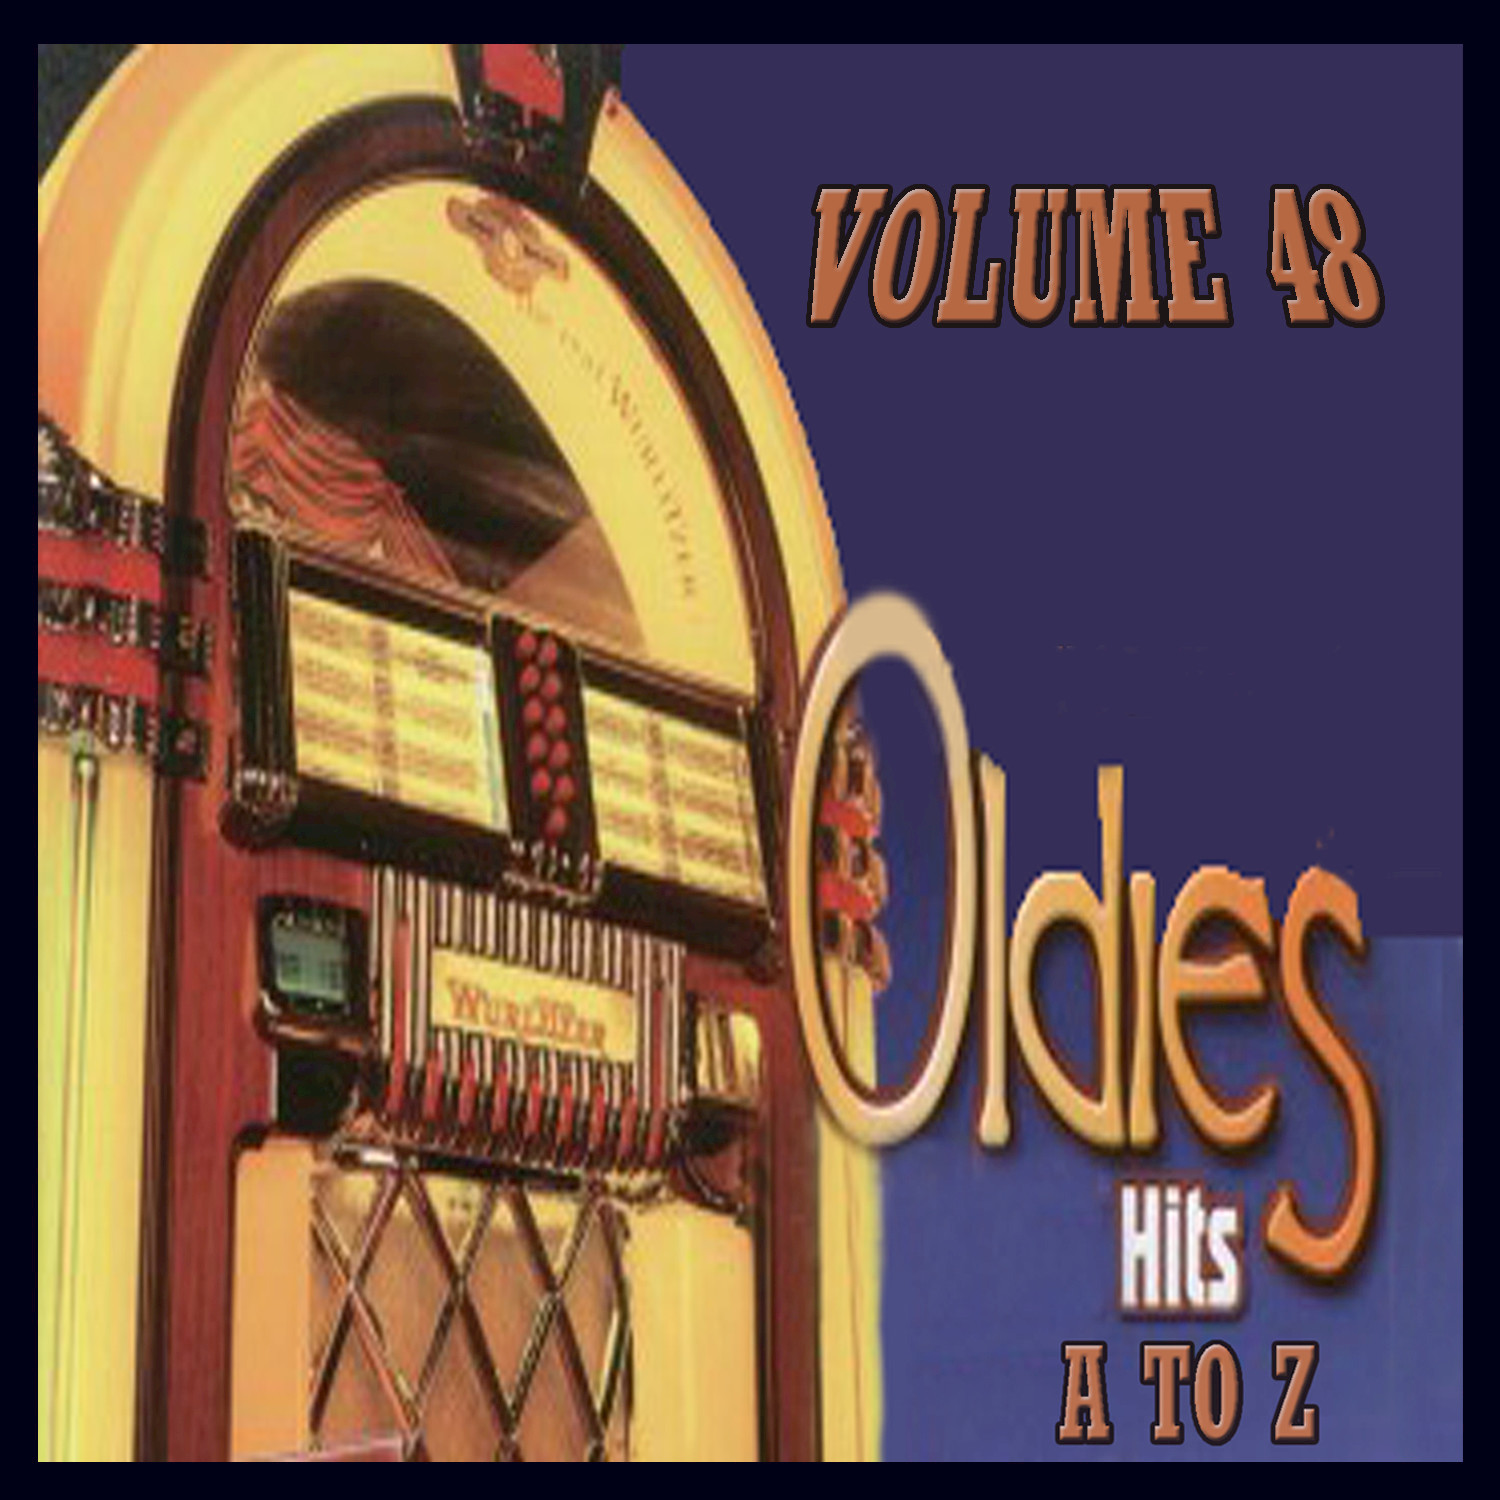 Oldies Hits A to Z, Vol.48